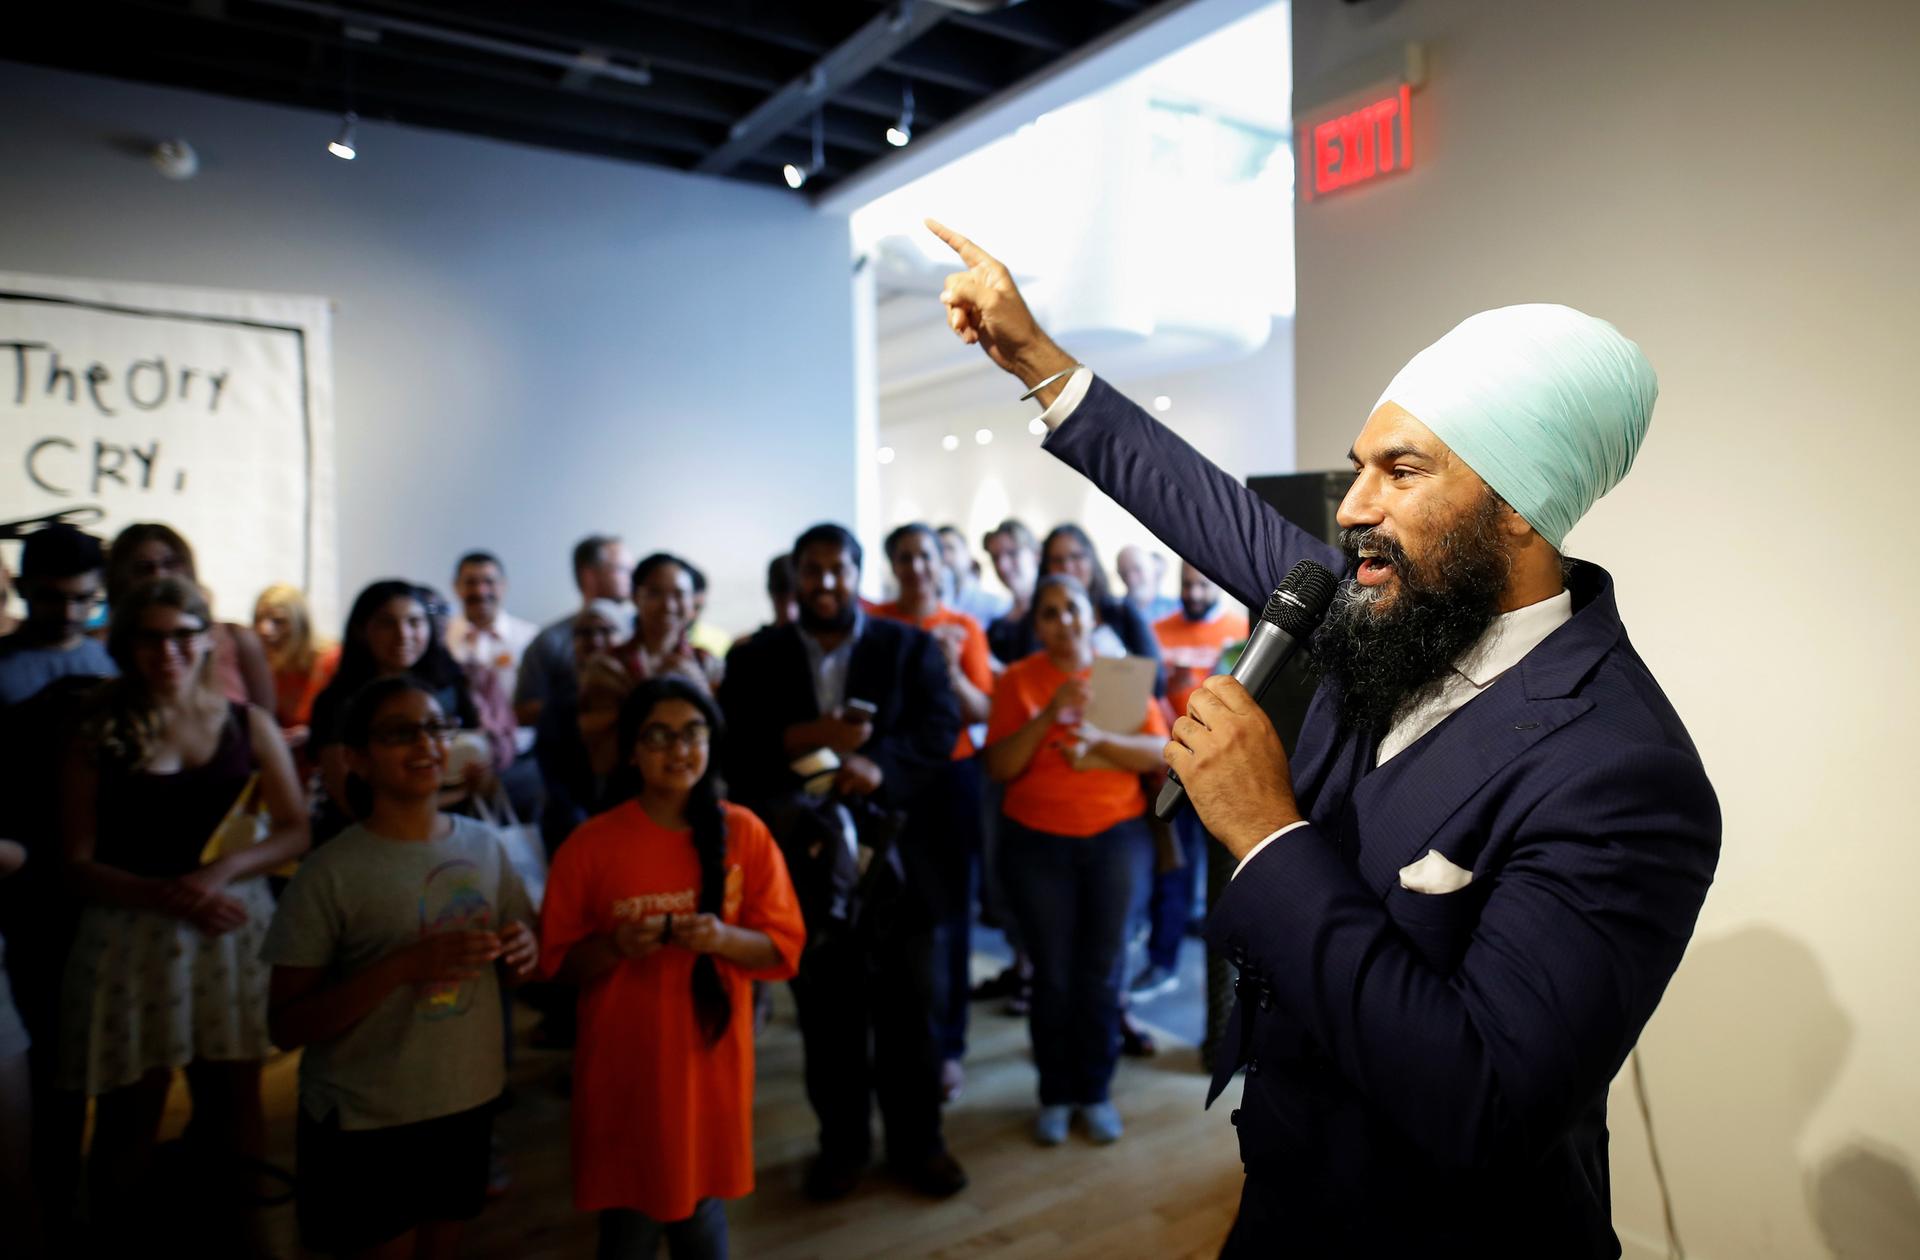 New Democratic Party candidate Jagmeet Singh speaks at an event in Hamilton, Ontario, Canada, on July 17, 2017.